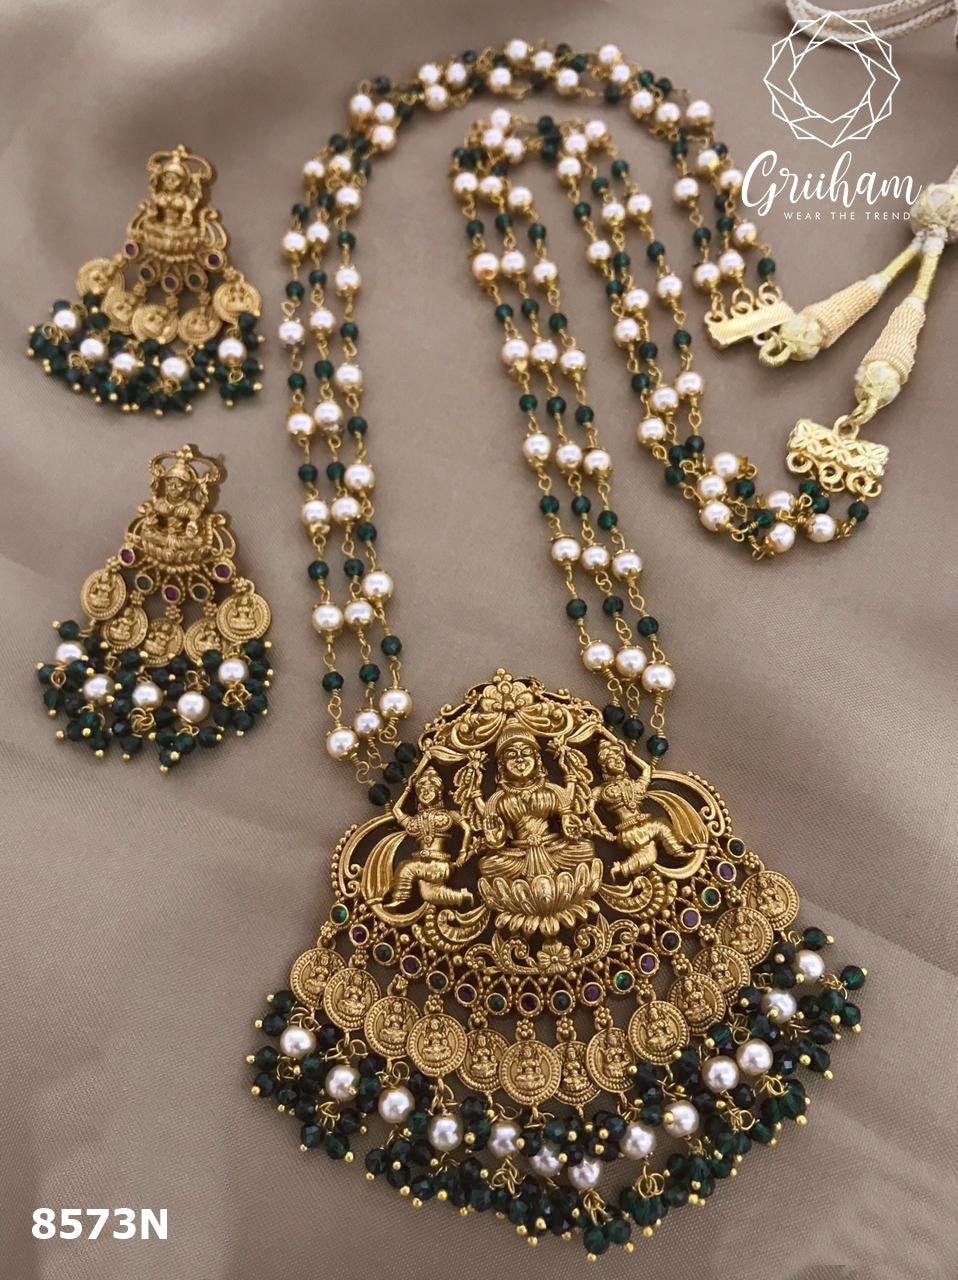 Premium Gold Plated Brass based Laxmi Long Hara Set with Three Line Coral Chain Attached 8573N-Necklace Set-Griiham-Griiham